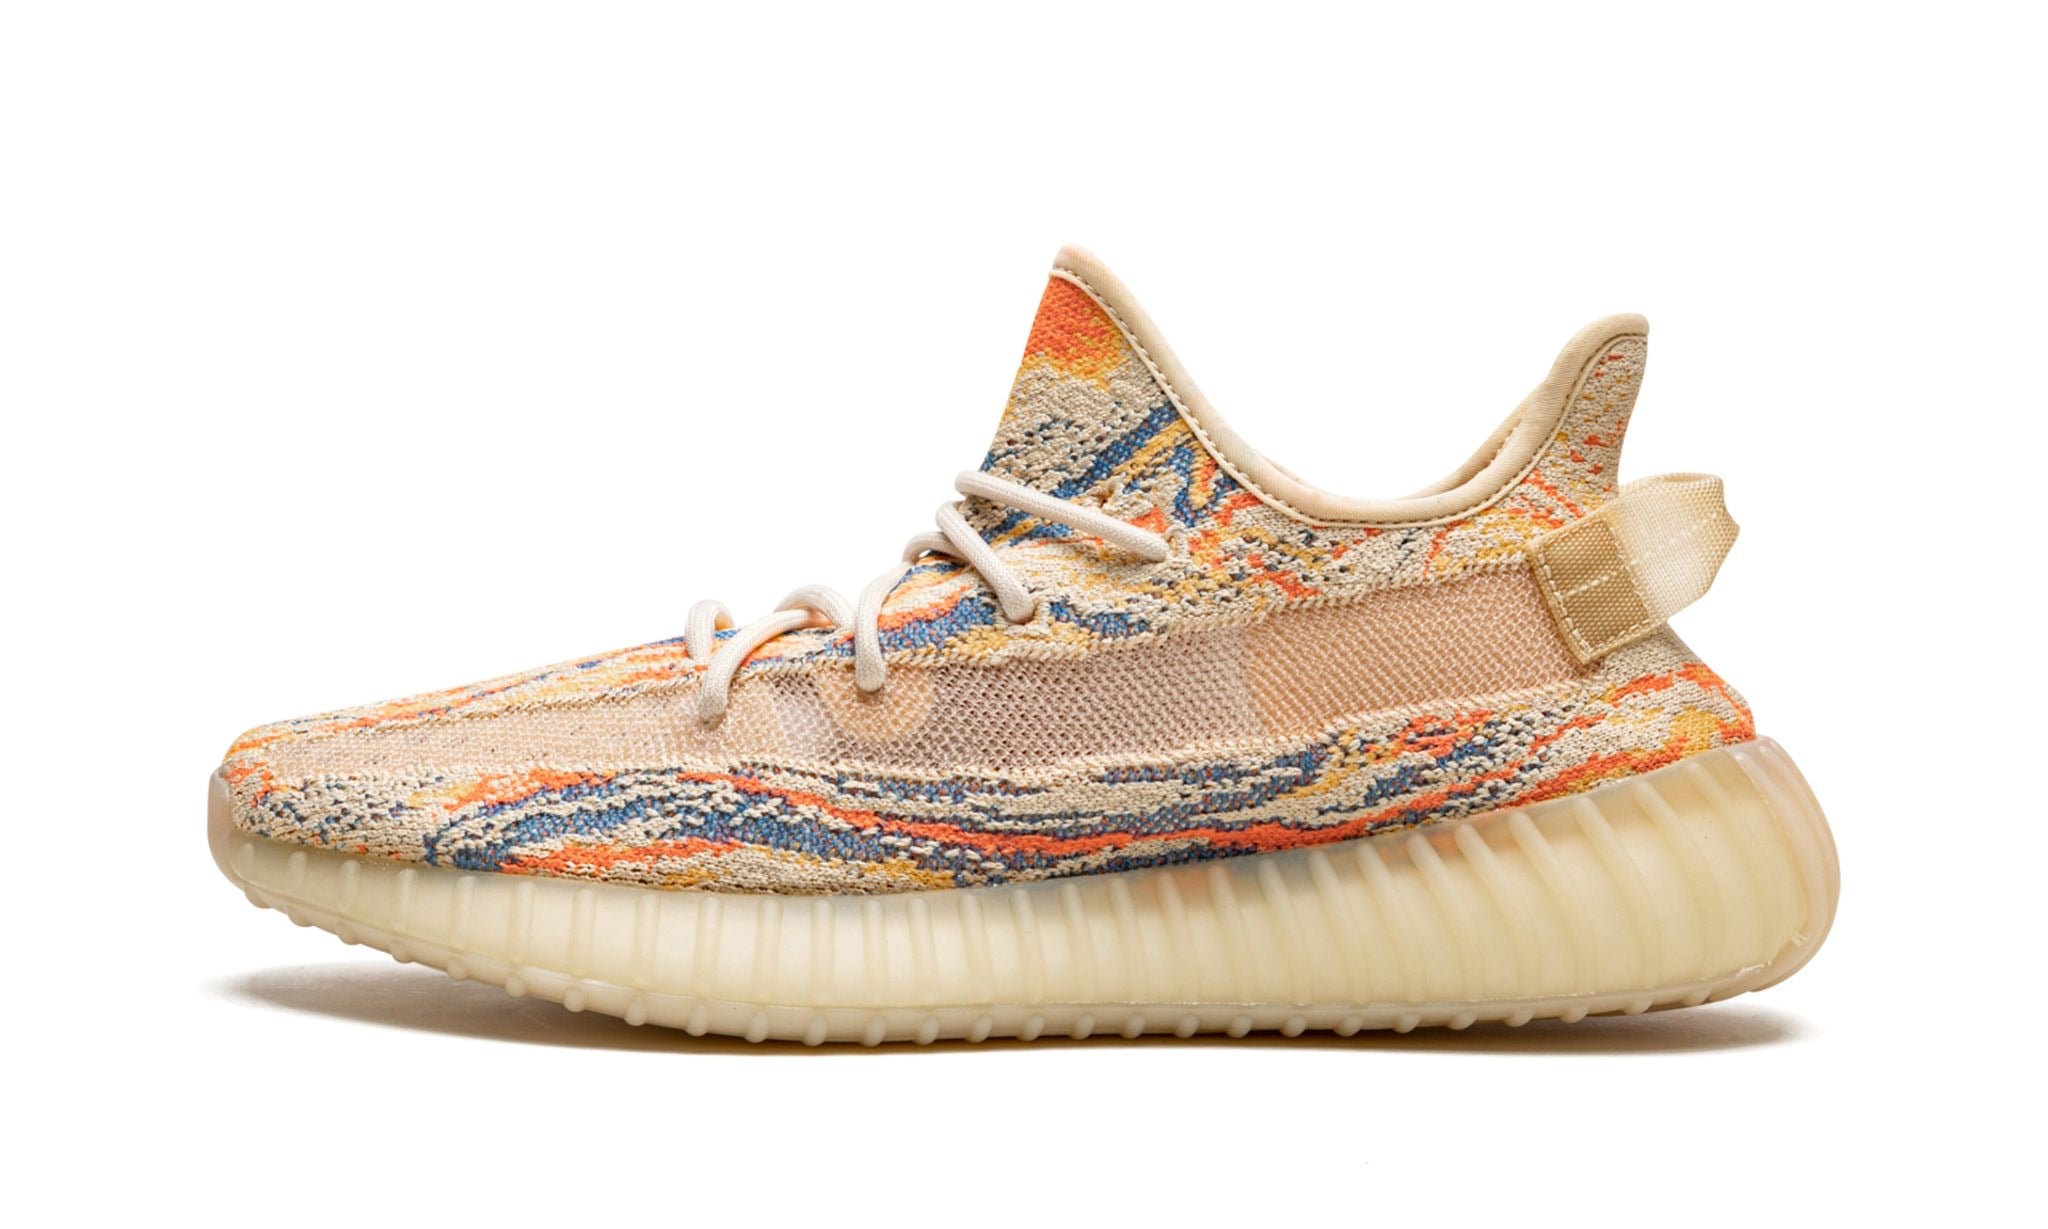 YEEZY 350 V2 MX OAT – ONE OF A KIND